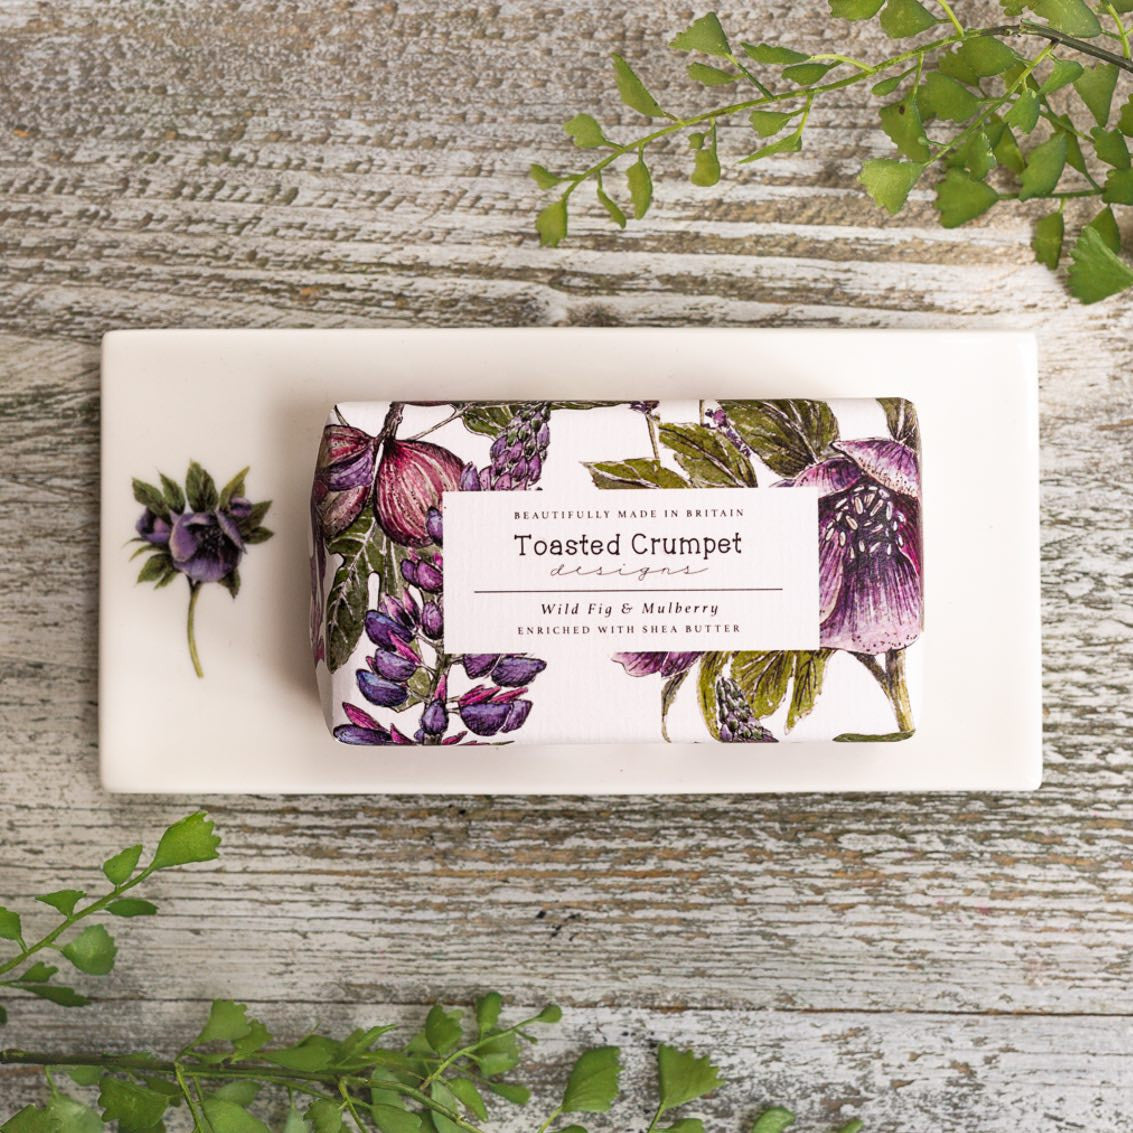 Wild Fig & Mulberry Soap by Toasted Crumpet.